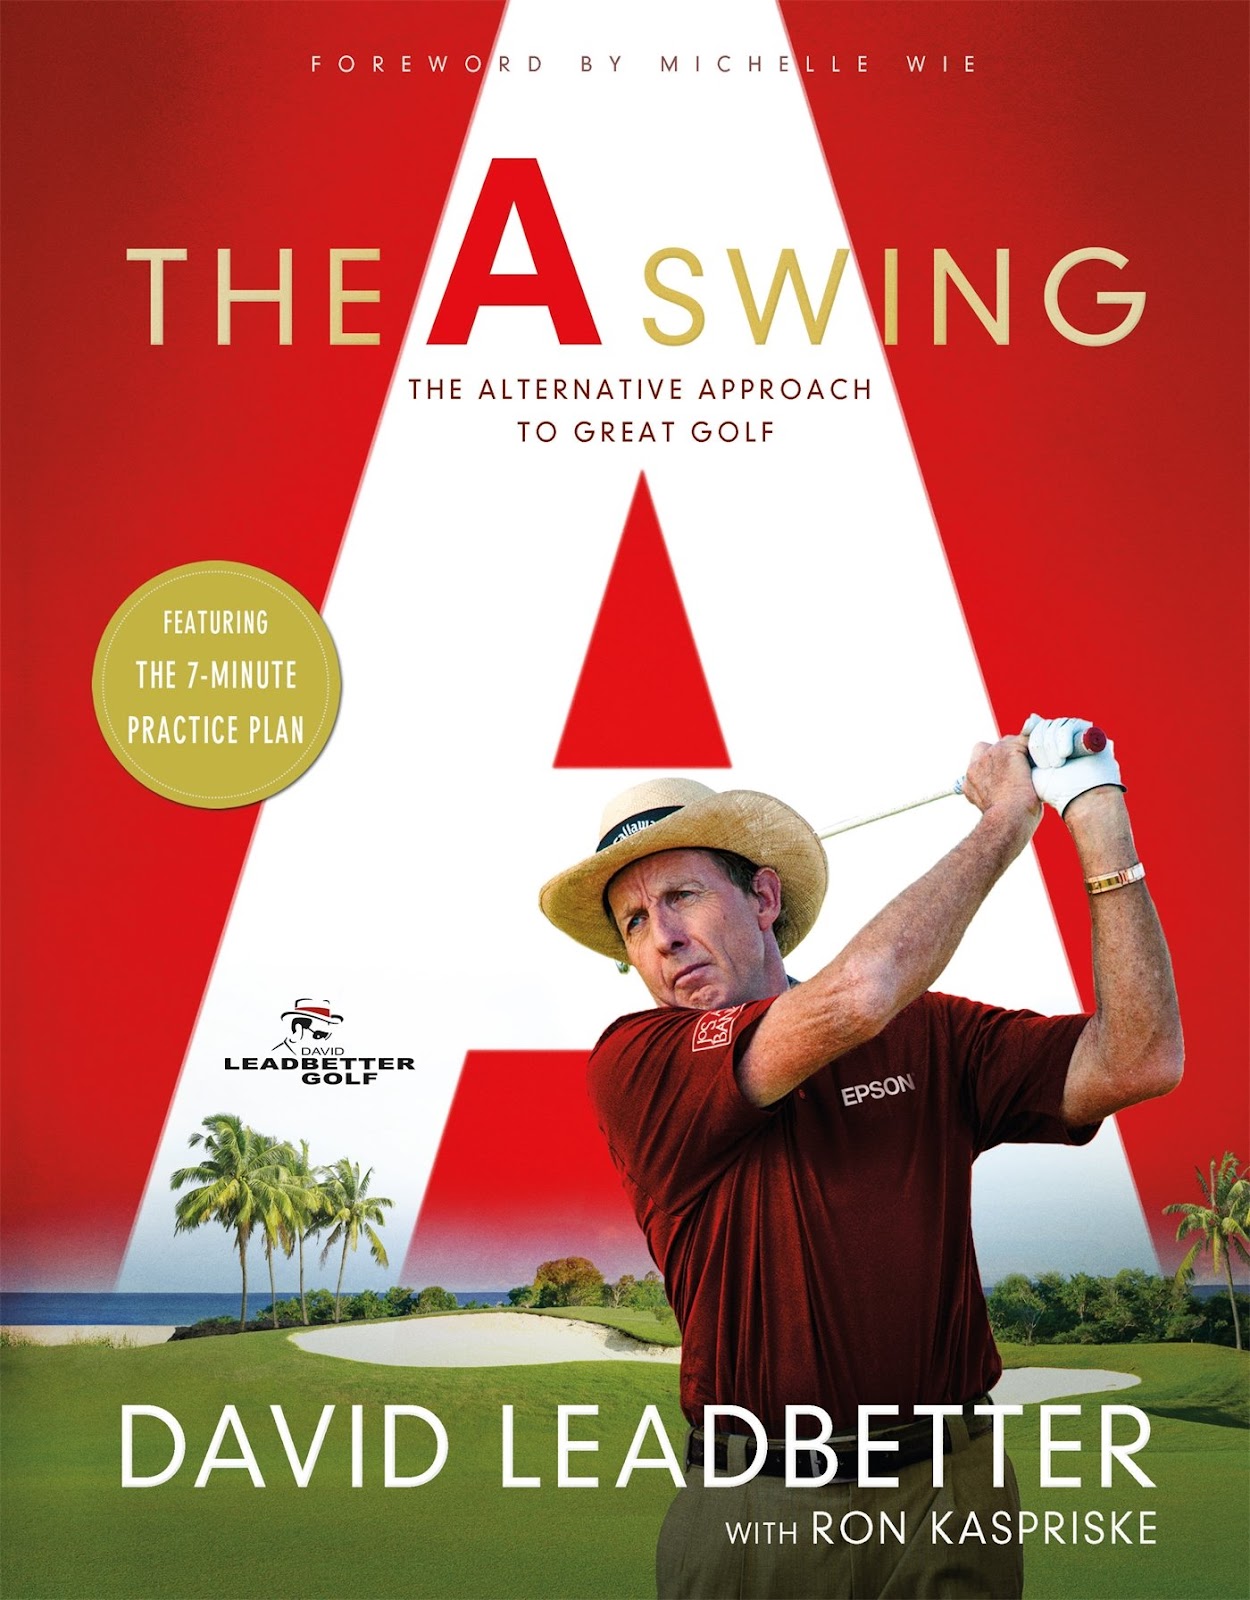 Premium Books - The A Swing: The Alternative Approach to Great Golf